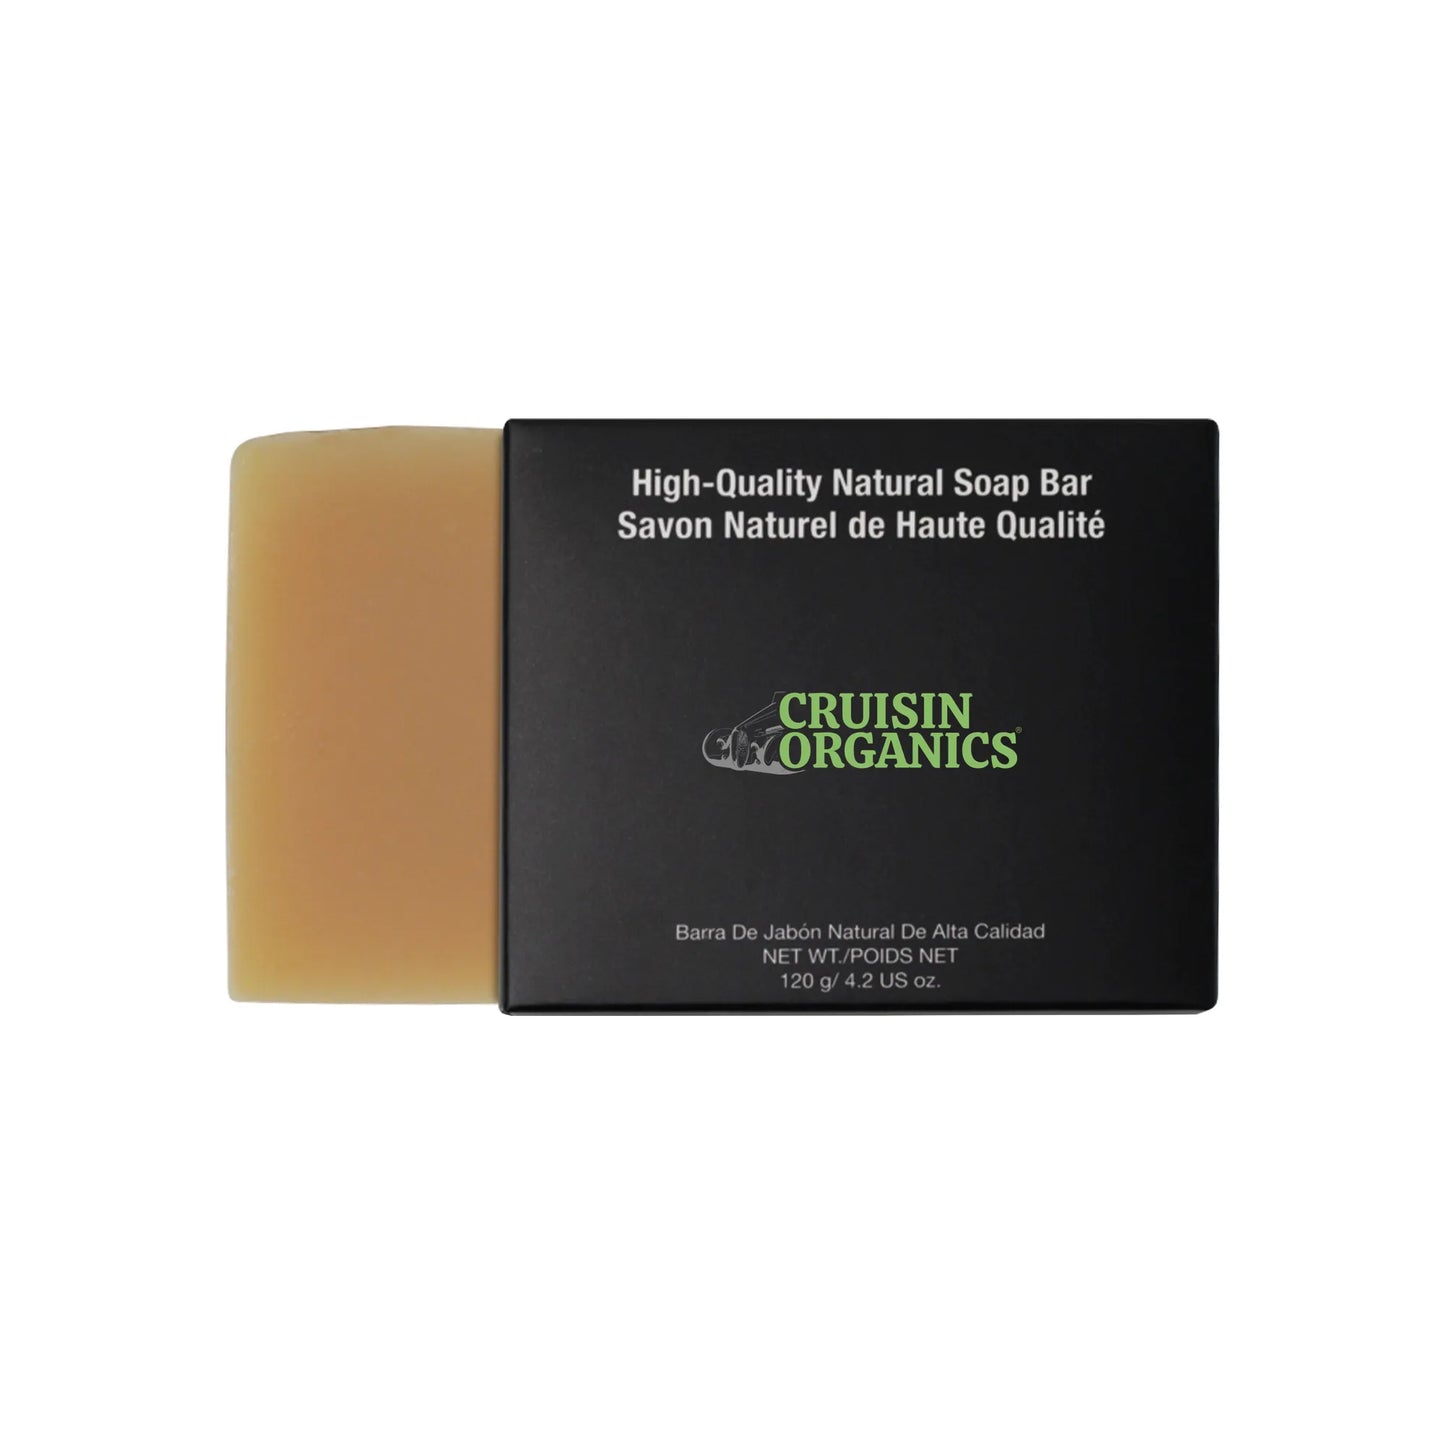 A mild, cleansing soap for the citrus lover—introducing the natural Cruisin Organics citrón soap. With quality lime essential oils, it works to both brighten and soothe the skin without stripping the skin of healthy oils. Packed with essential nutrients and vitamins, the blend of plant-based oils and goat’s milk is the perfect way to wash off a hot summer’s day. Feel refreshed and silky-soft with this natural citrón soap.